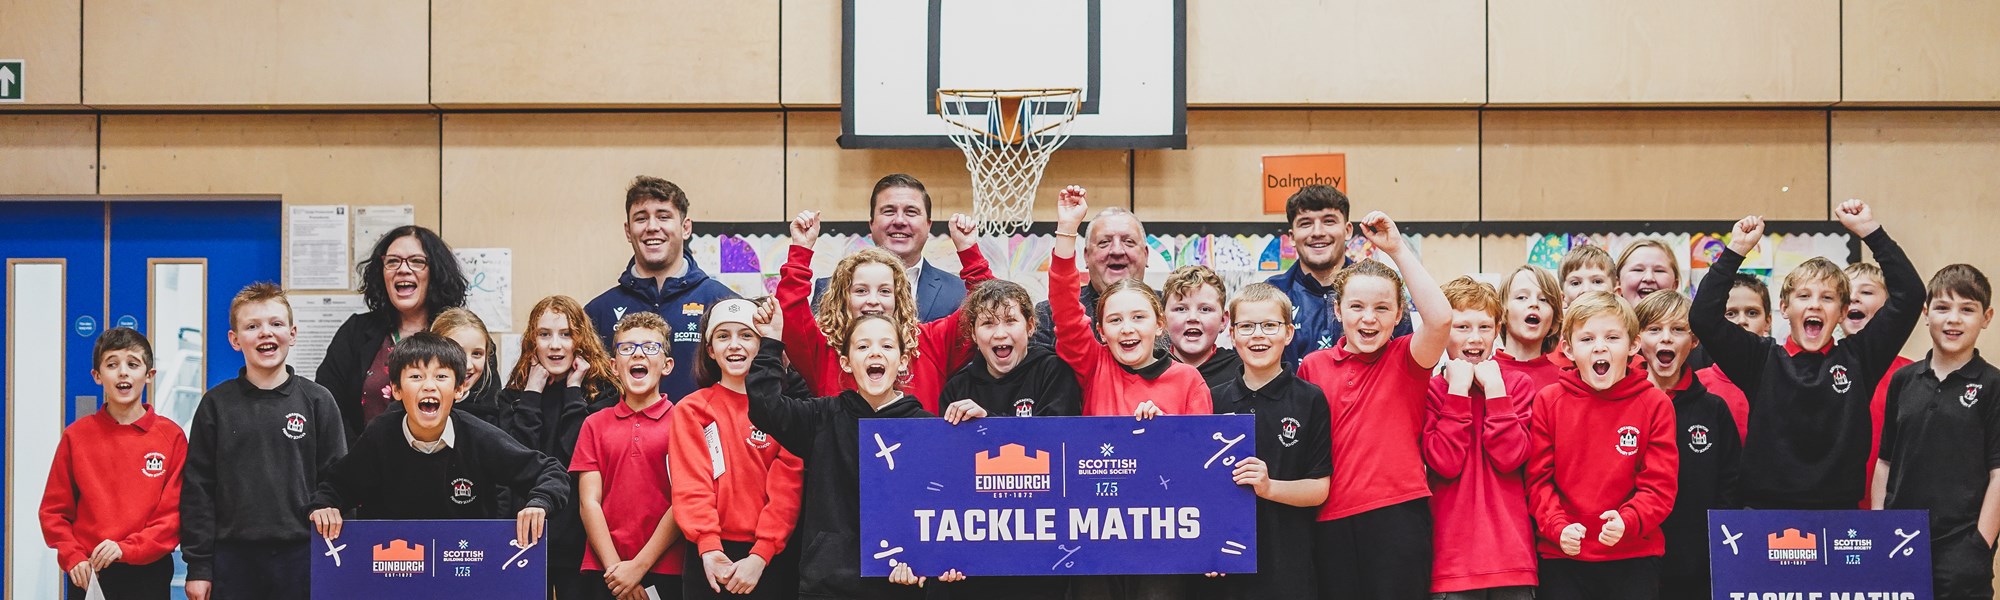 Background image: We're helping primary school pupils across Scotland  'Tackle Maths'.